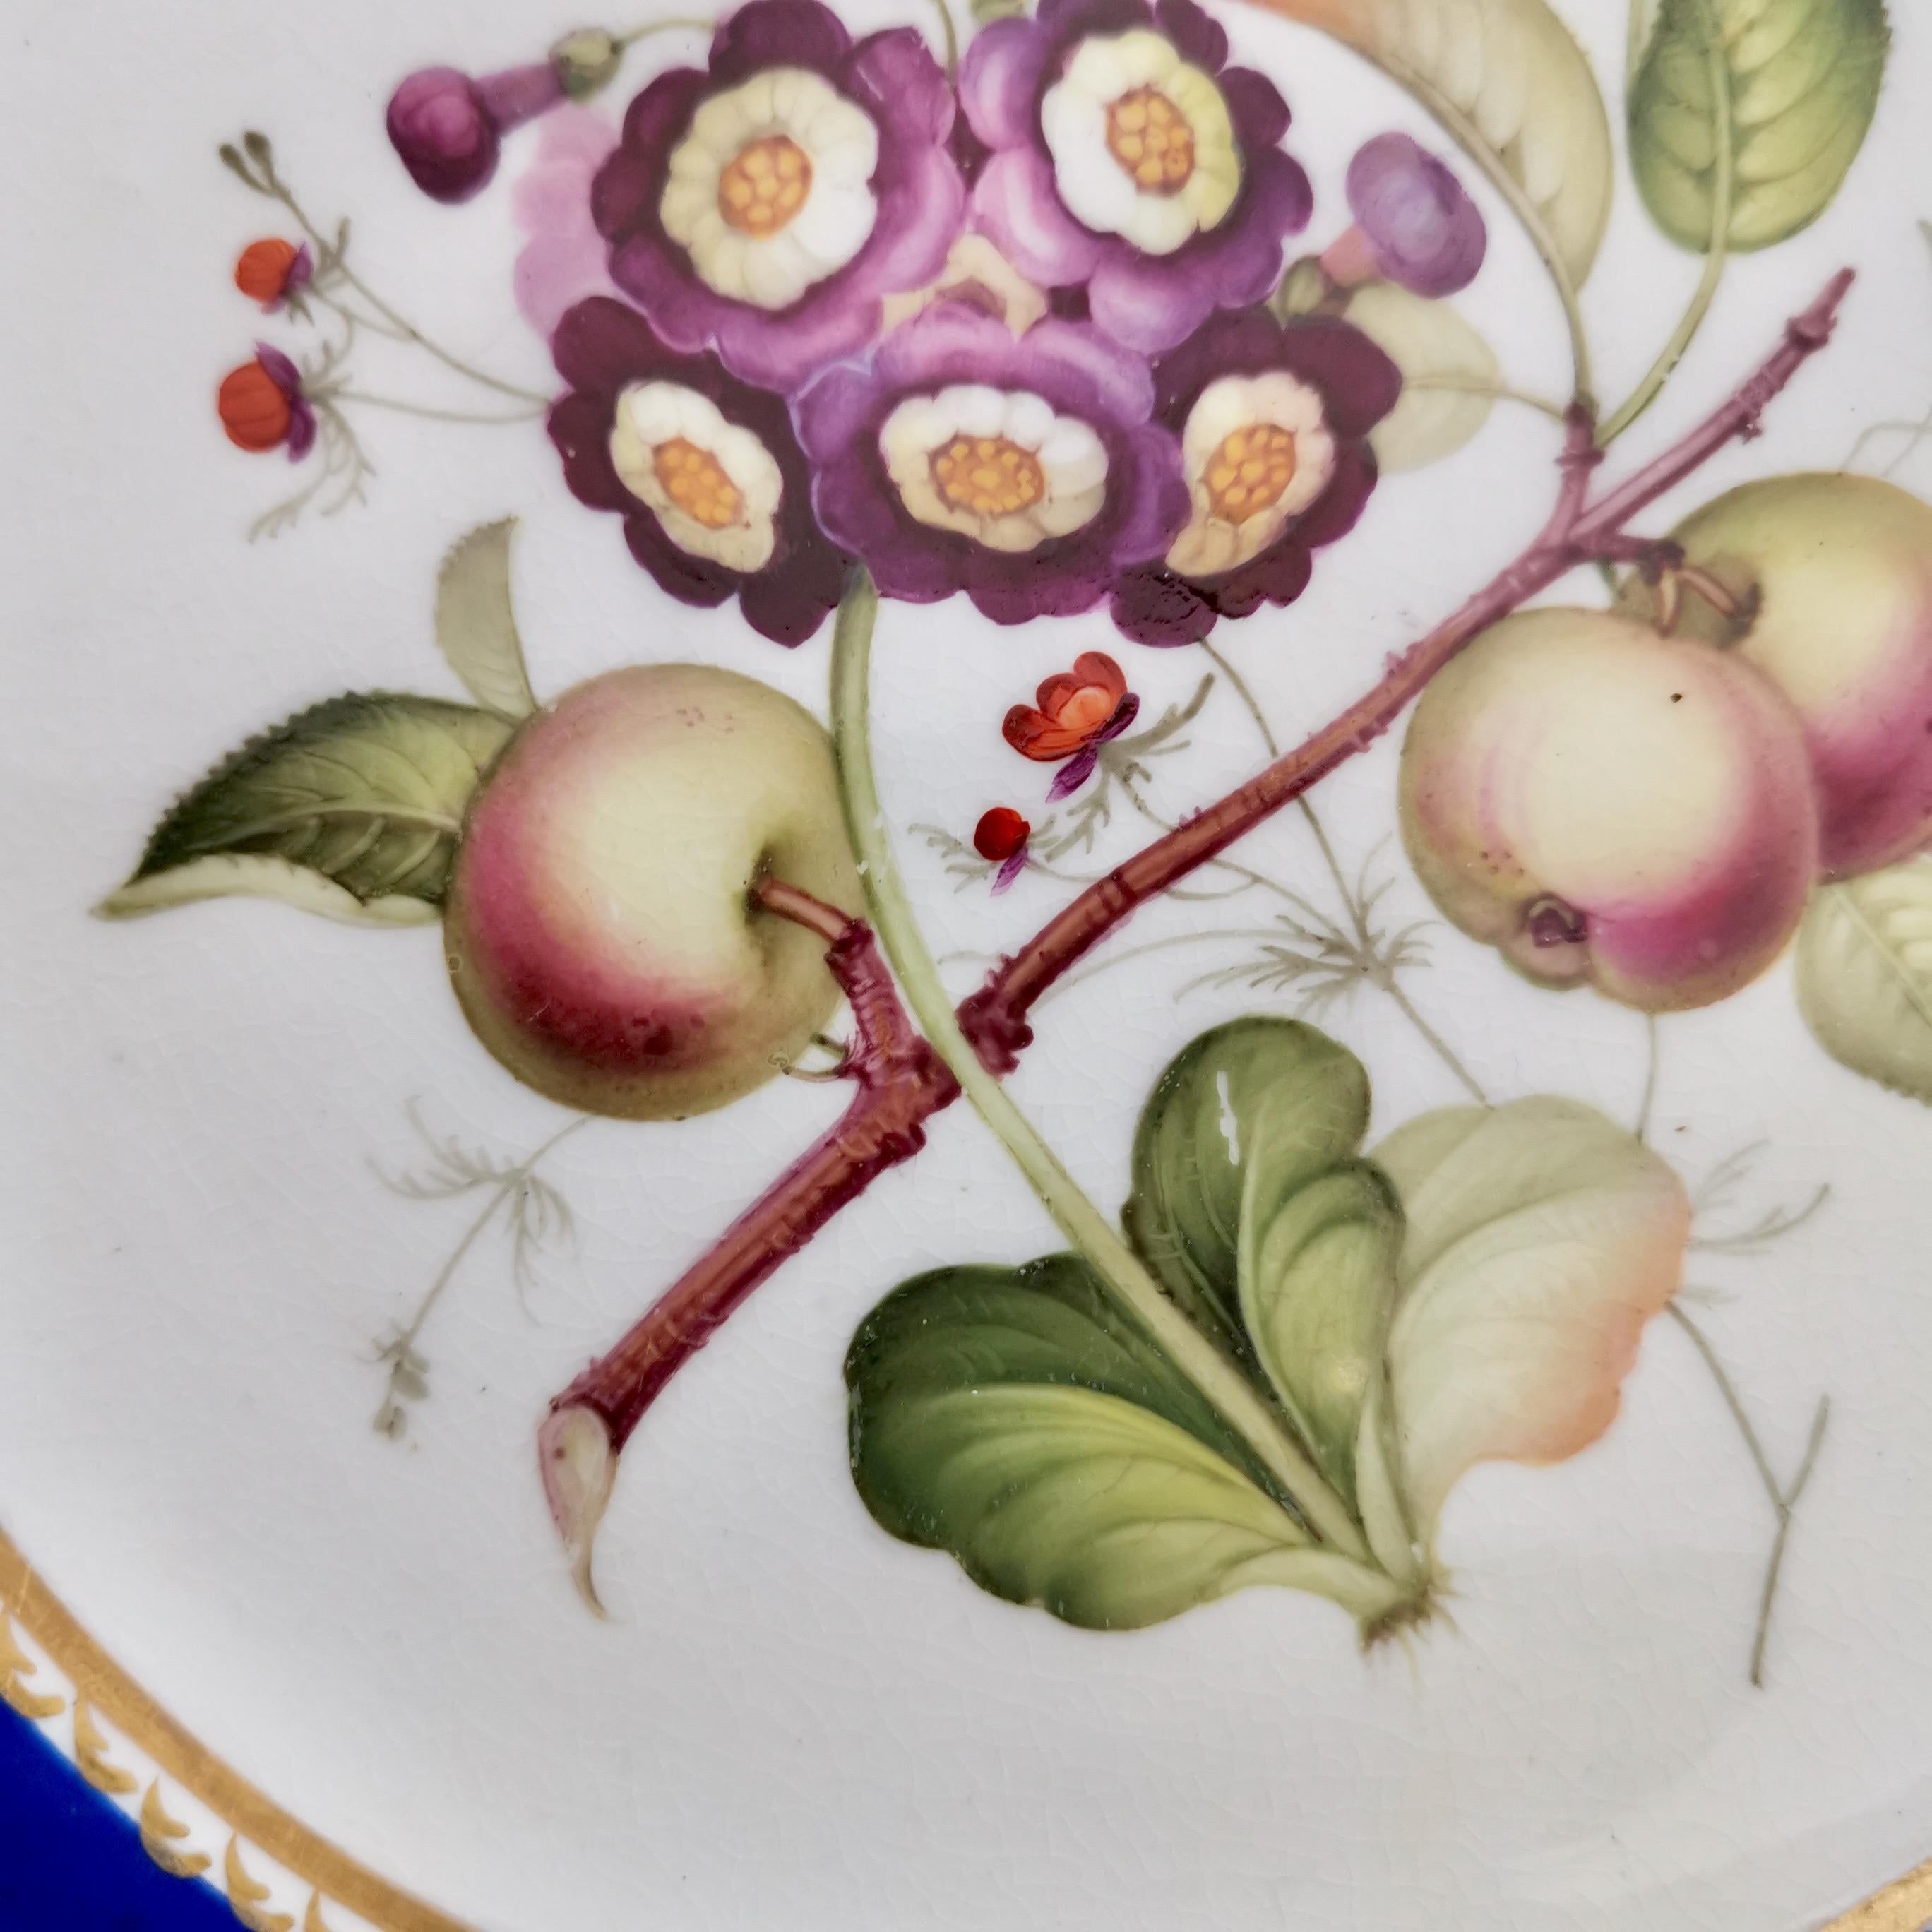 Hand-Painted Coalport Porcelain Plate, Blue with Auriculas and Apples, ca 1830